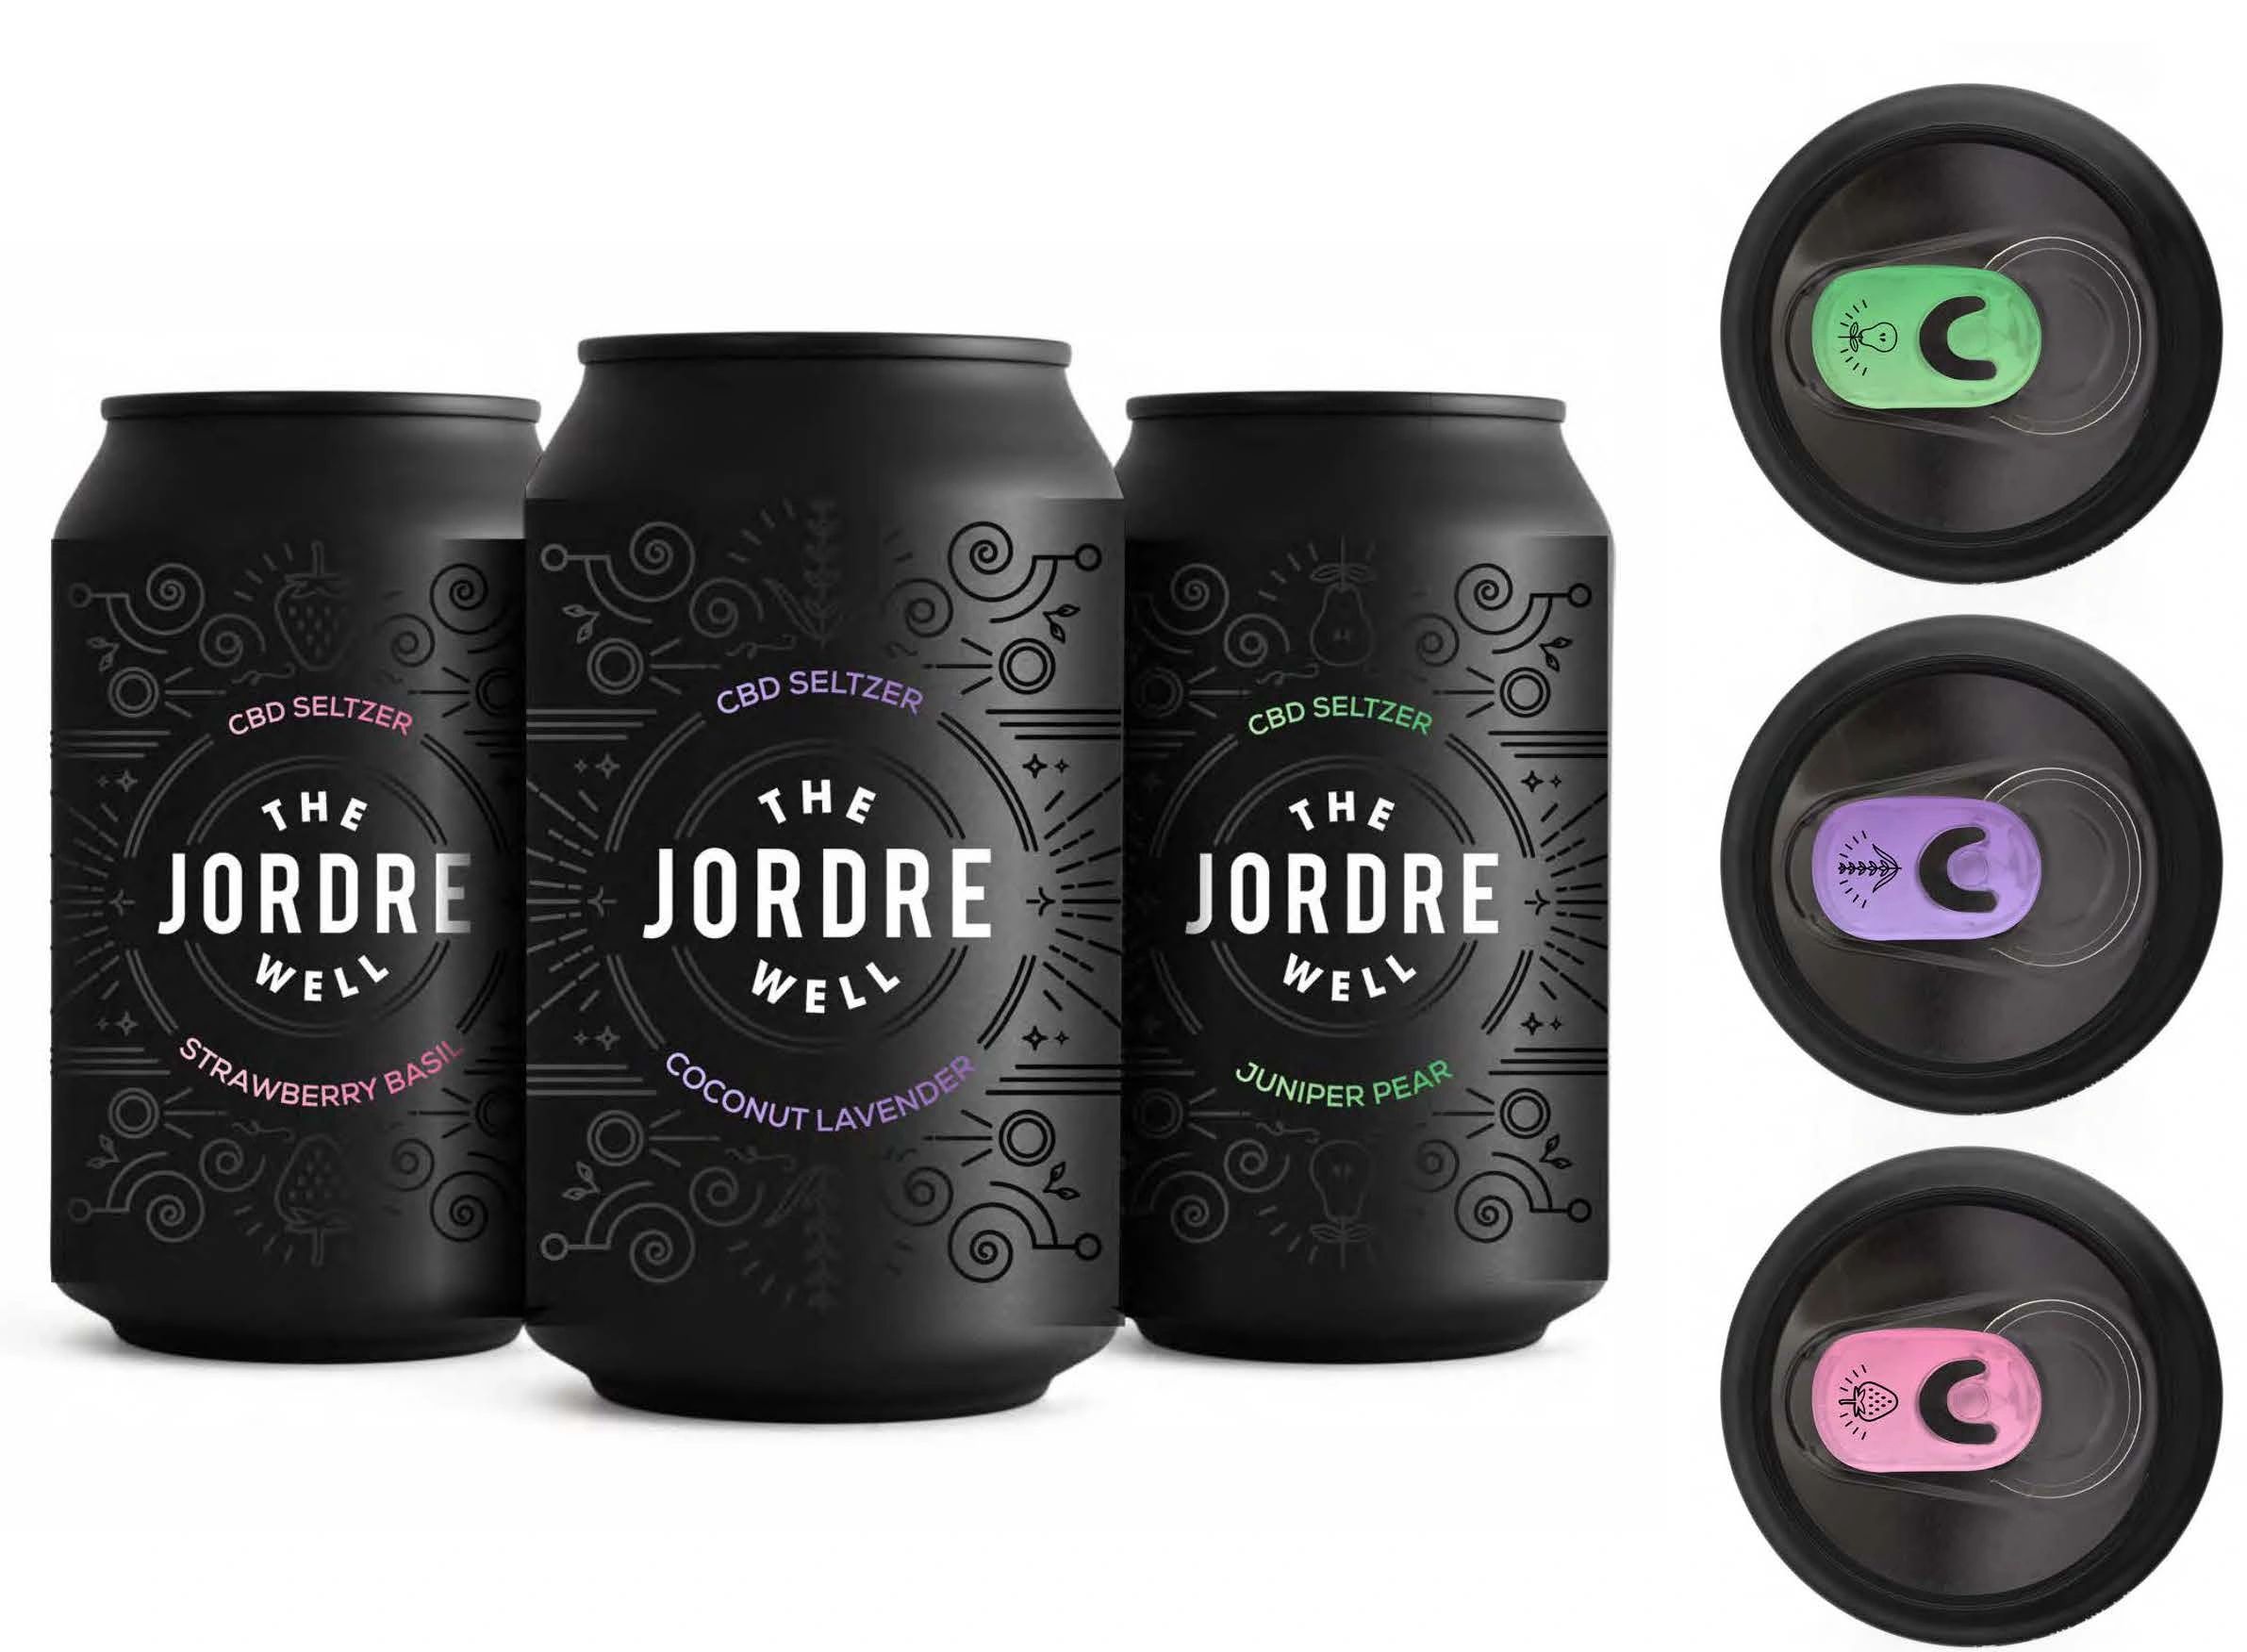 Image of The Jordre Well Cans